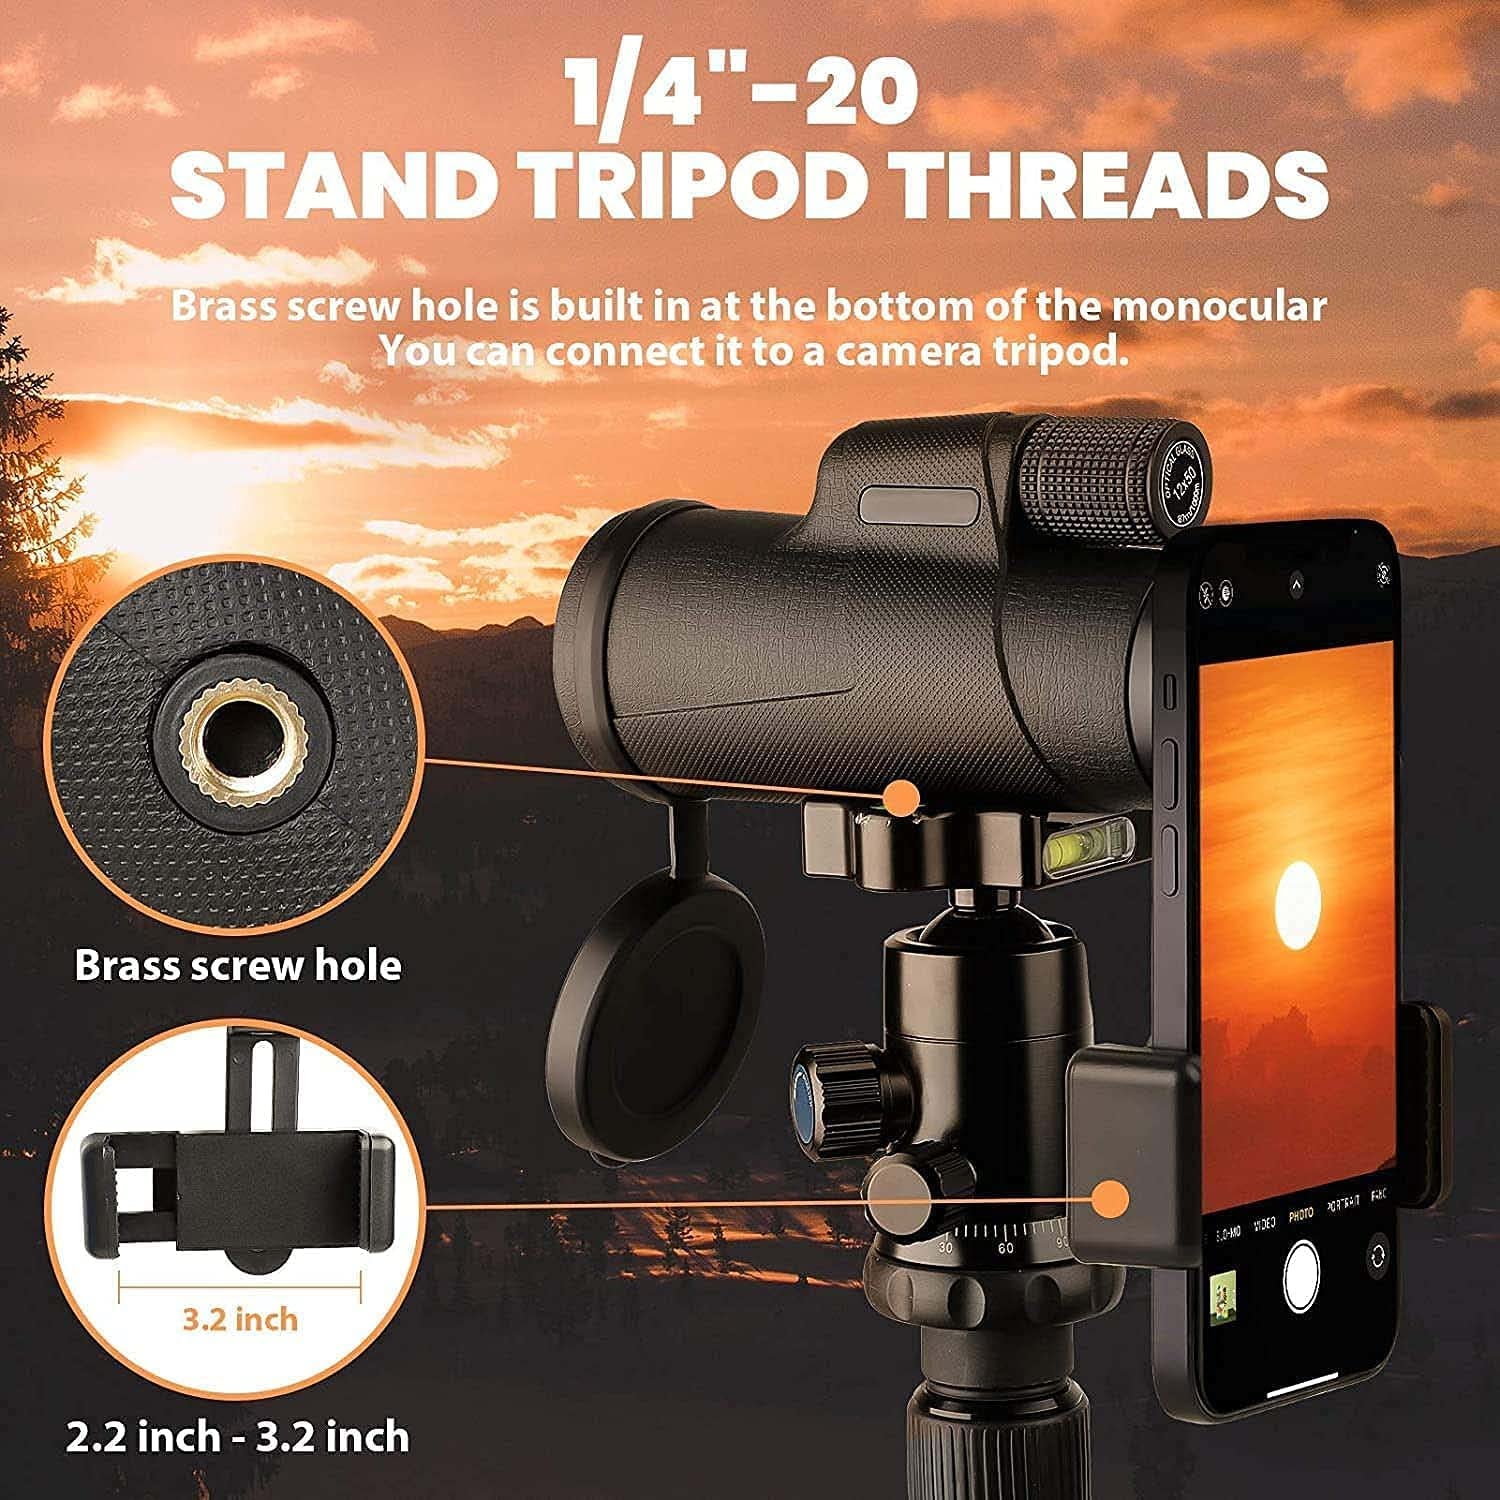 Monocular Telescope,12X50 High Power HD Monocular with Smartphone Holder Tripod Waterproof Night Vision and Clear Prism Dual Focus,Hunting Travelling Wildlife Bird Watching Gifts, Black